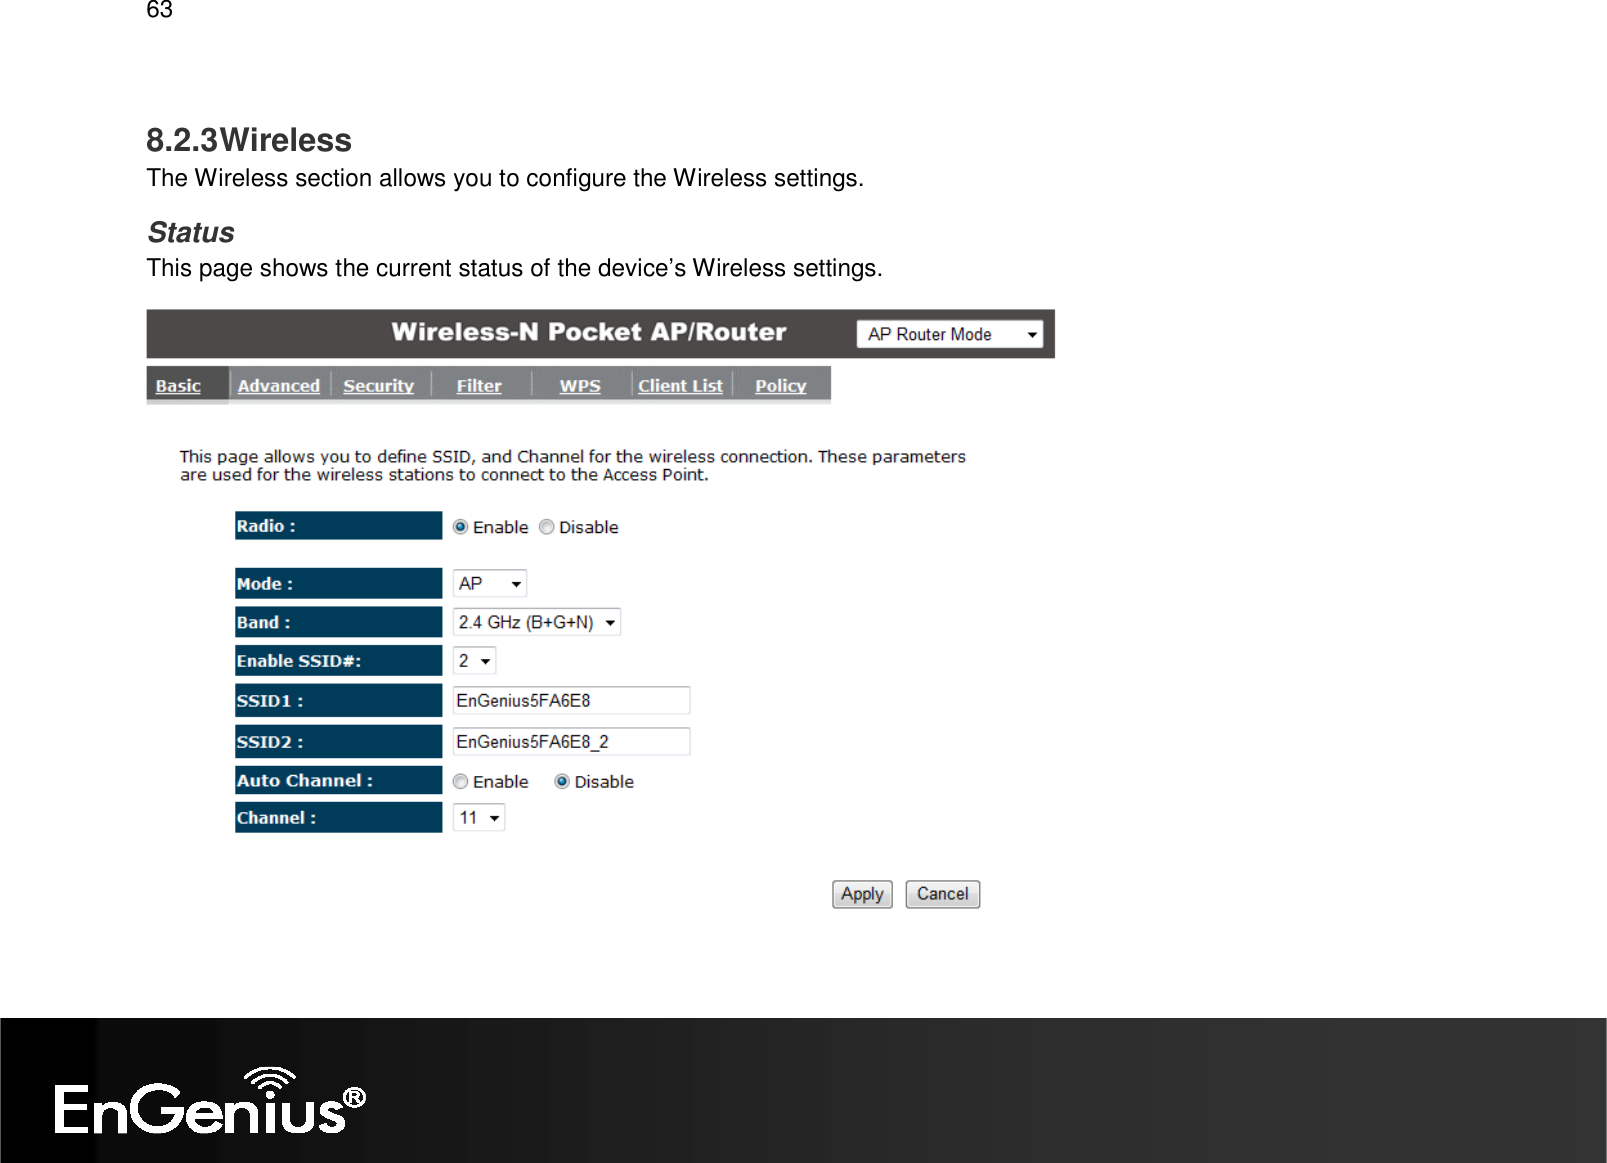   63  8.2.3 Wireless The Wireless section allows you to configure the Wireless settings. Status This page shows the current status of the device’s Wireless settings.   